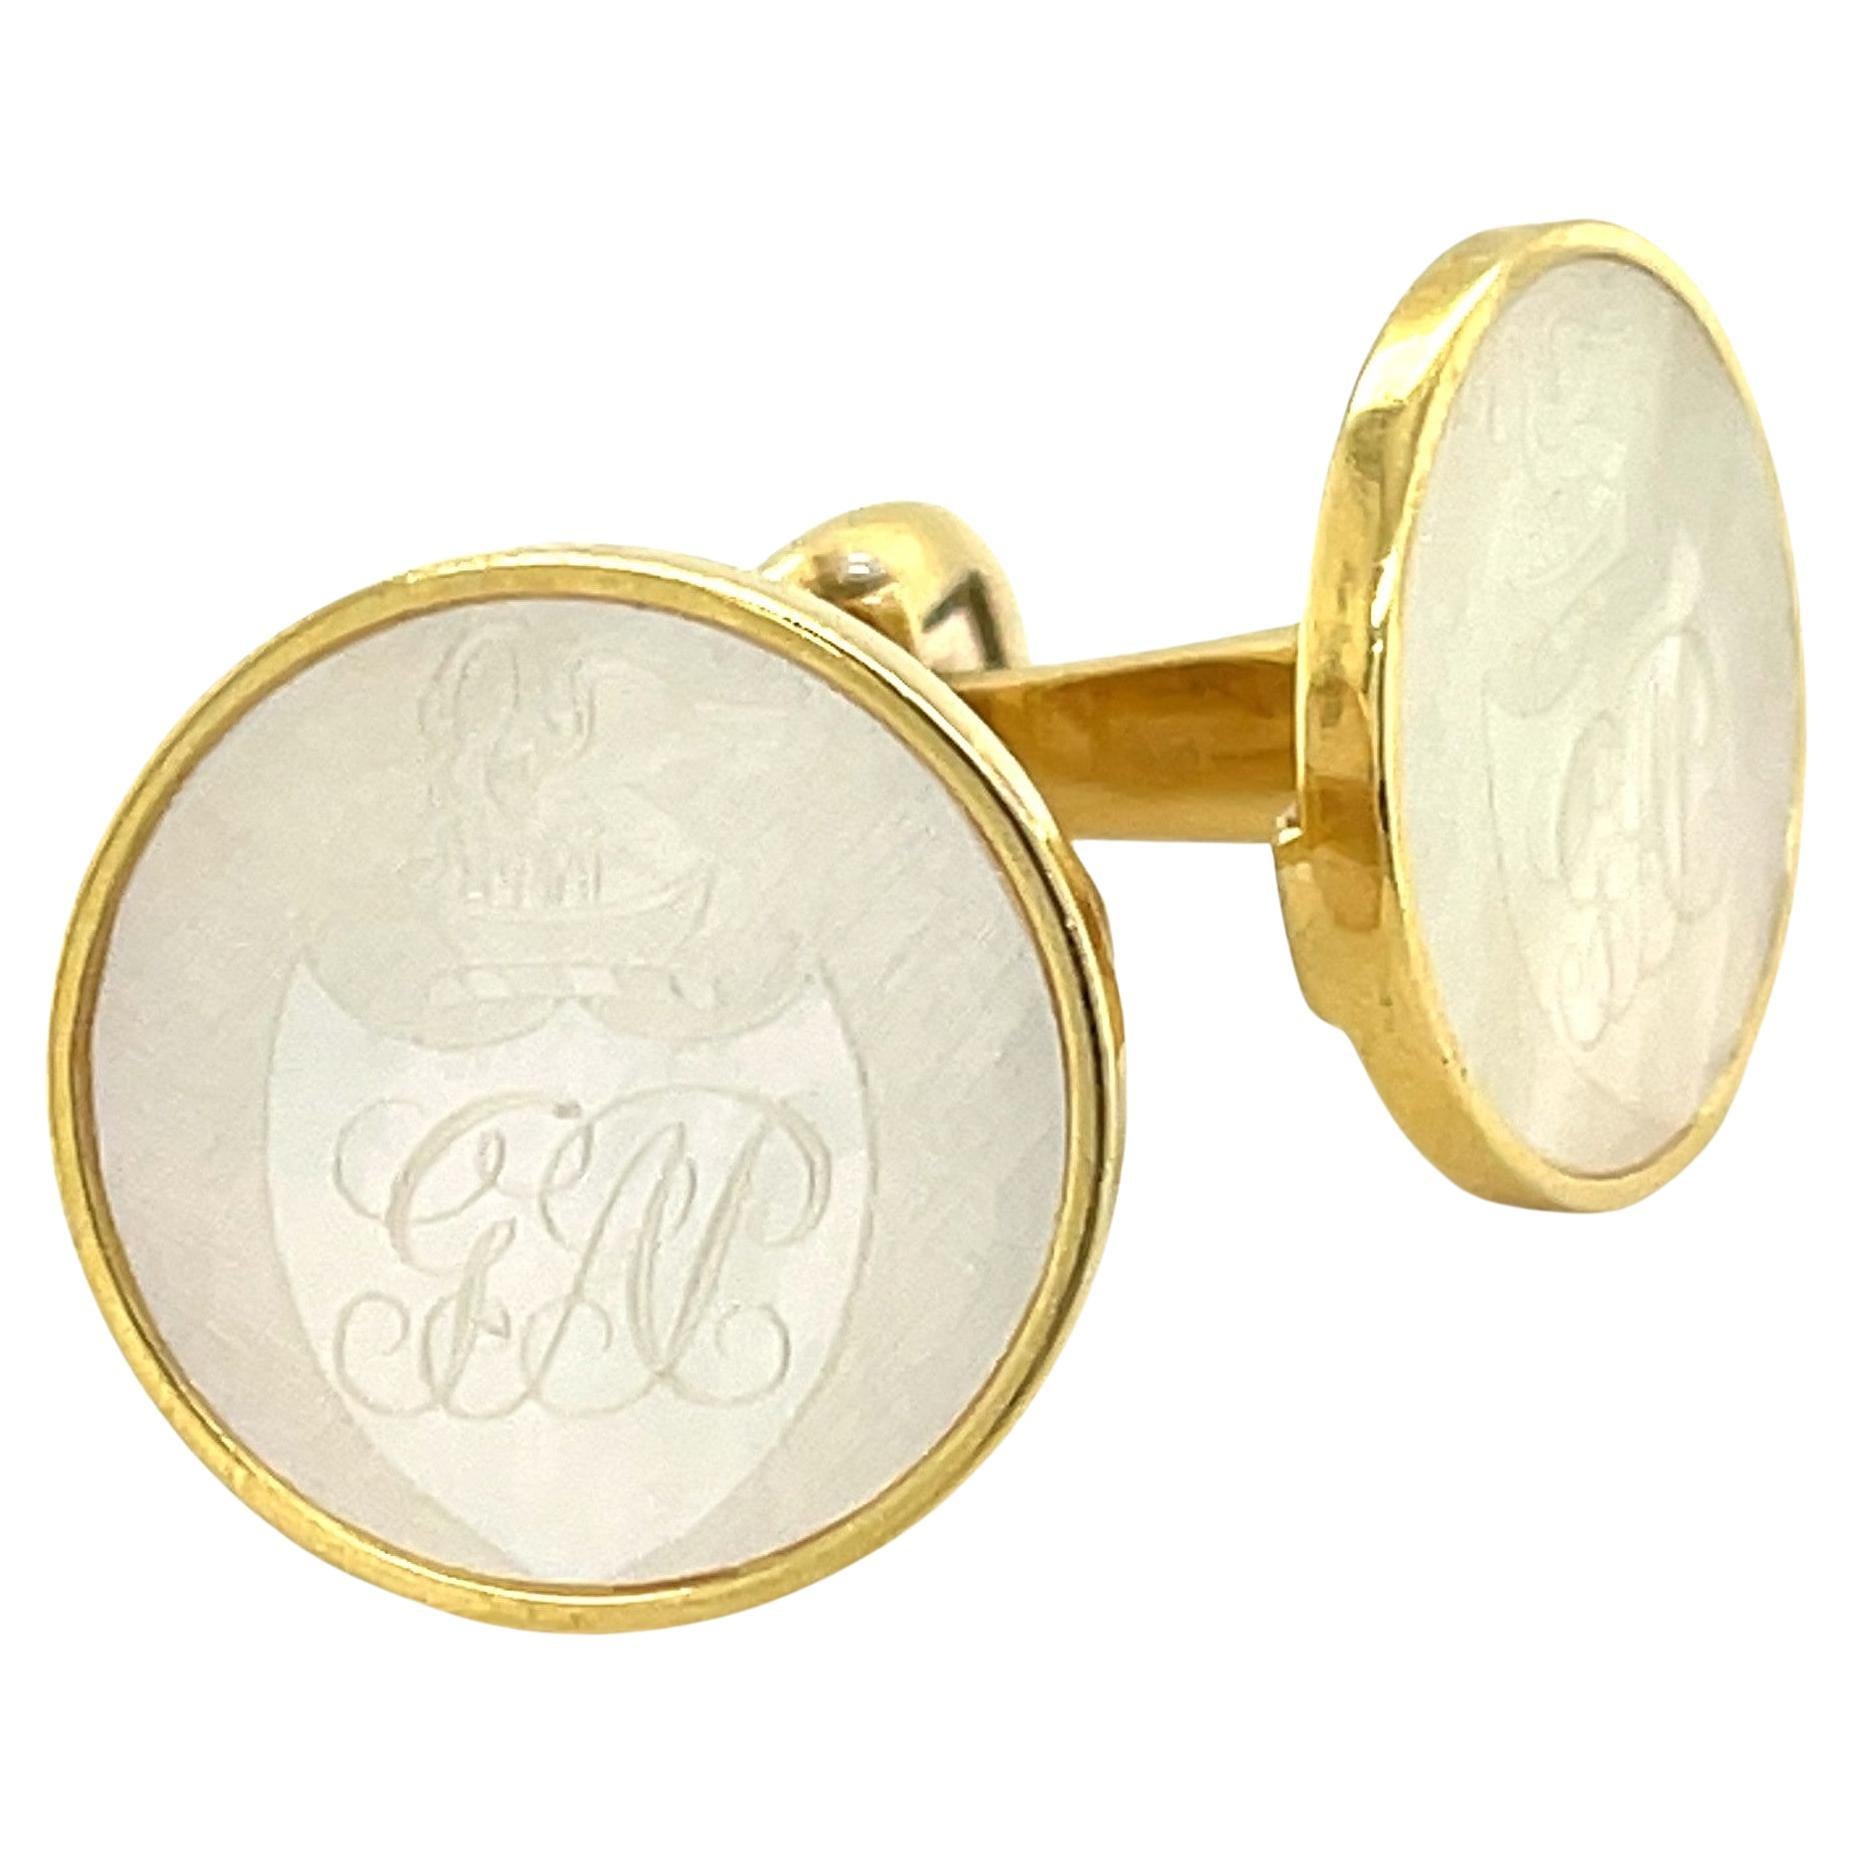 Mother-of-pearl Antique Gaming Counter, 18k Yellow Gold Bezel Cuff Links